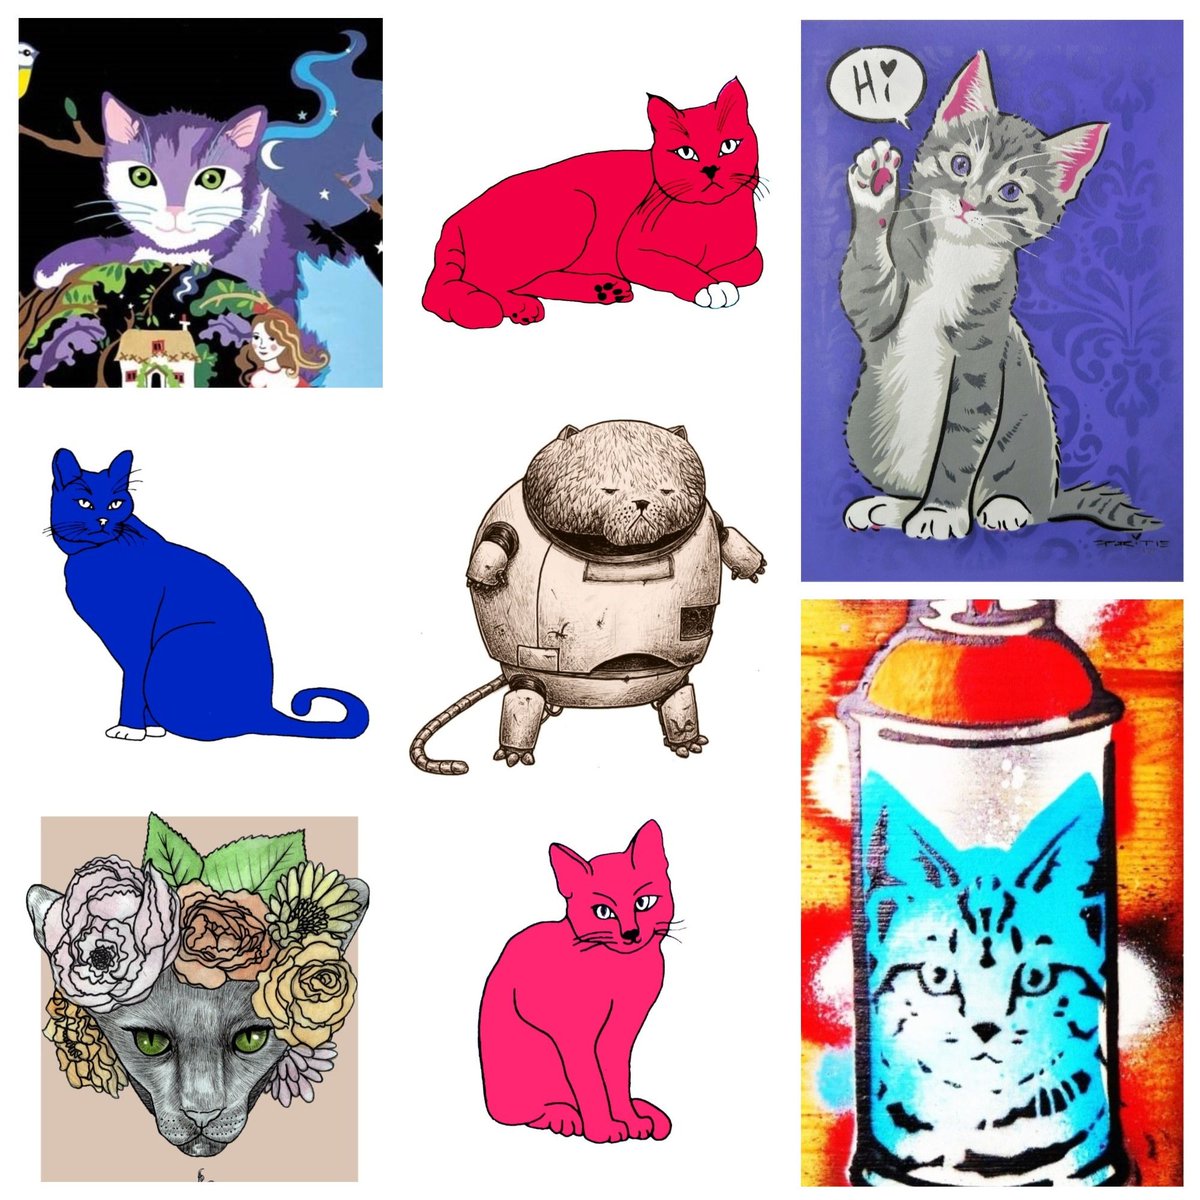 😺 Happy #Caturday! 😻 We're feelin' the feline here at #ConclaveBrighton! Here are 8 of the Group Show 8 purrmongers.  Shown: Vicky Scott, Liz Whiteman Smith, Sprite, Cassette Lord, Kid Squid, Leo Kember.

#cats #catart #feline #moggy #affordableart #brightoncats #kitty